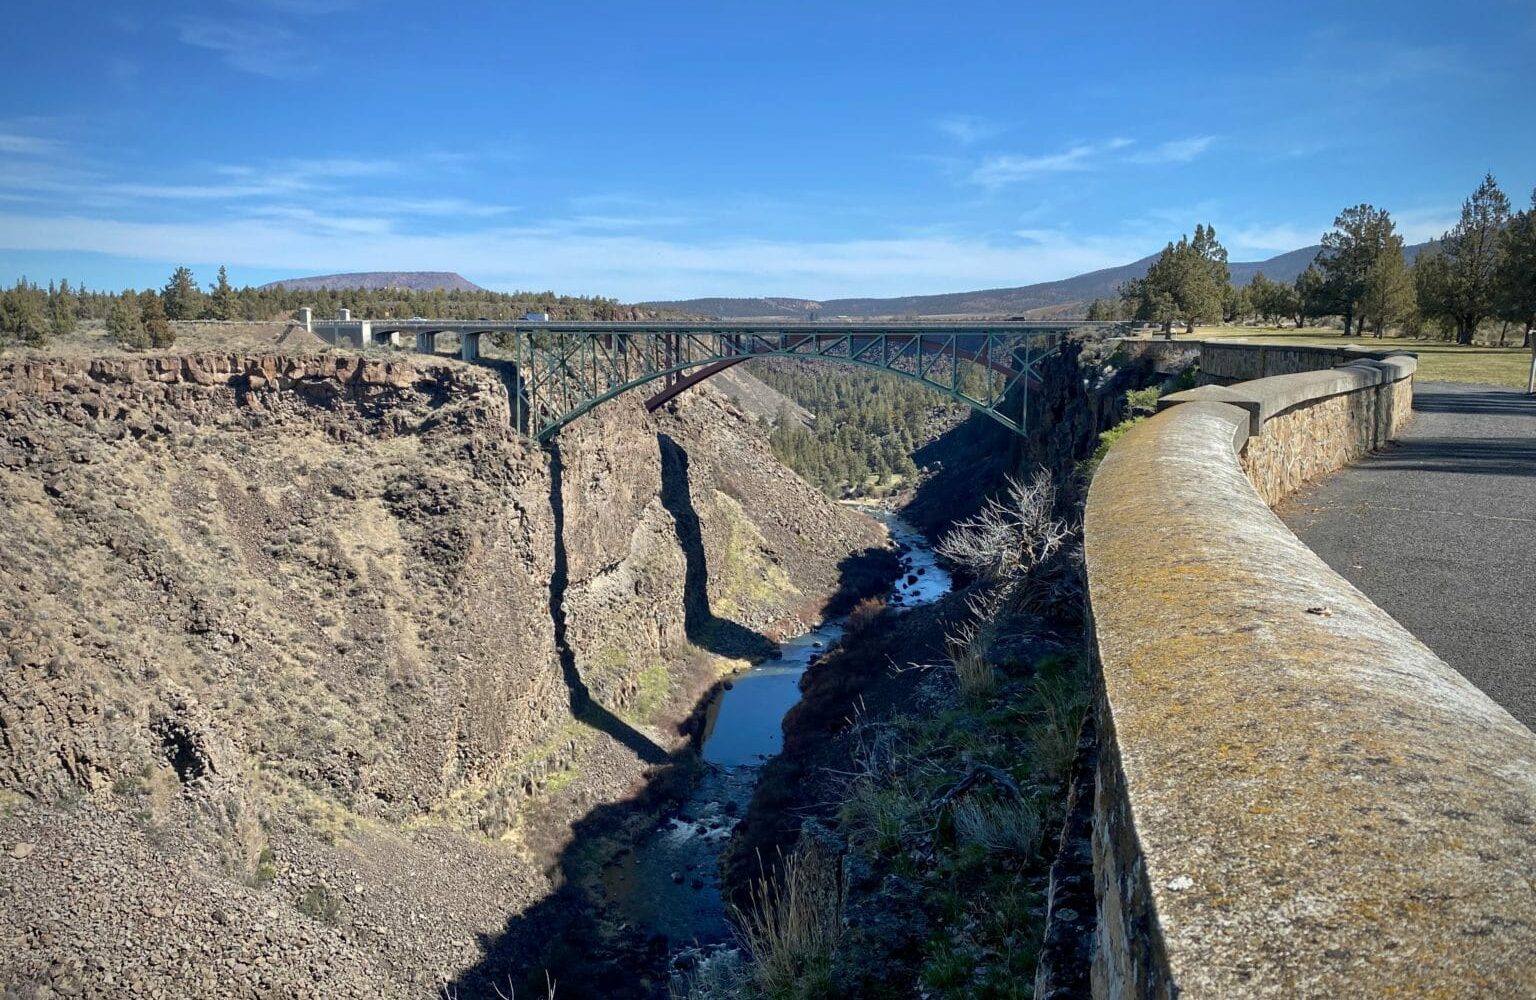 The Crooked River (High) bridge in Oregon